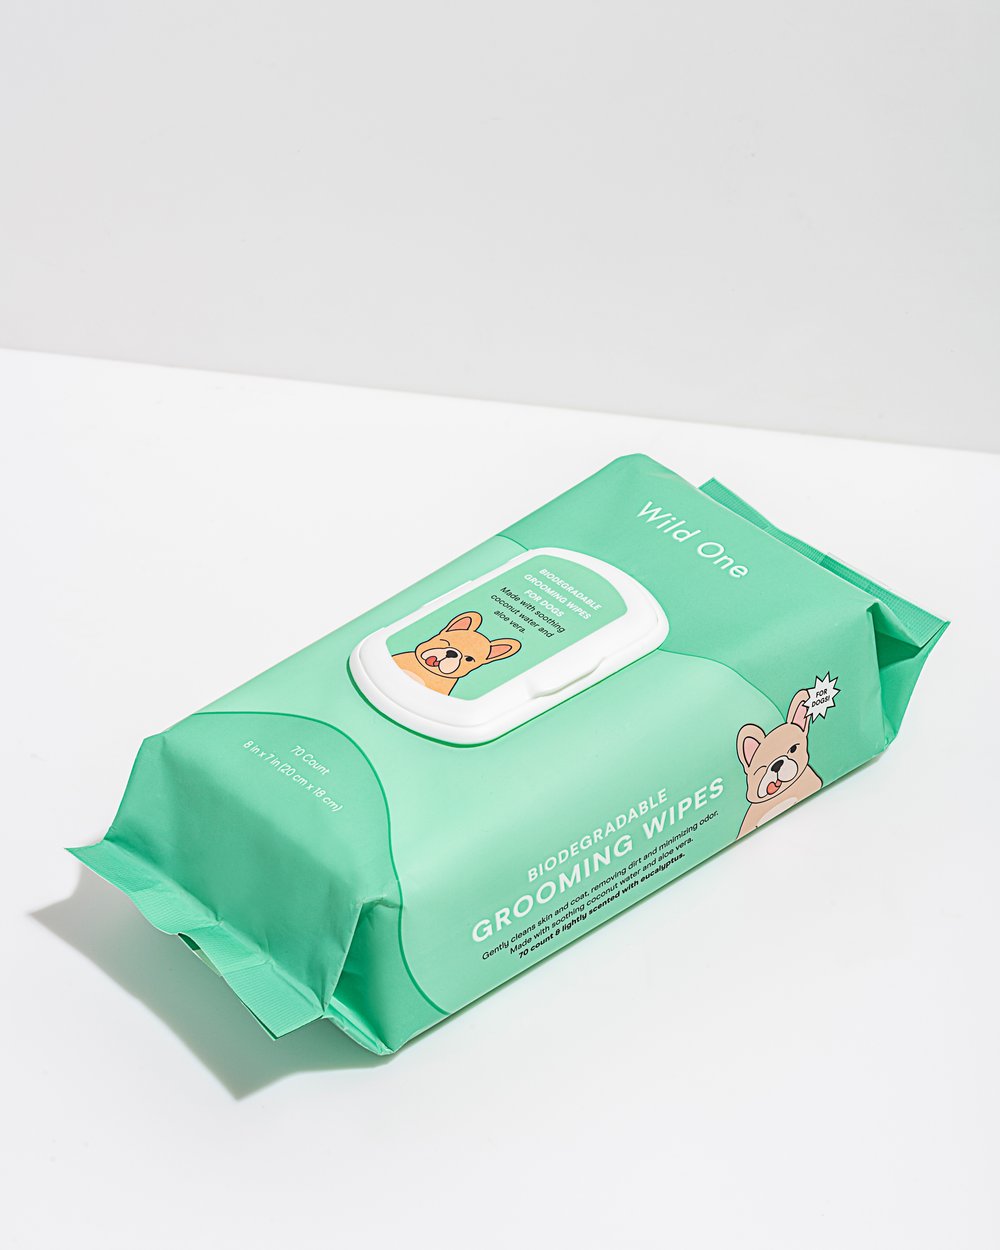 Biodegradable grooming wipes